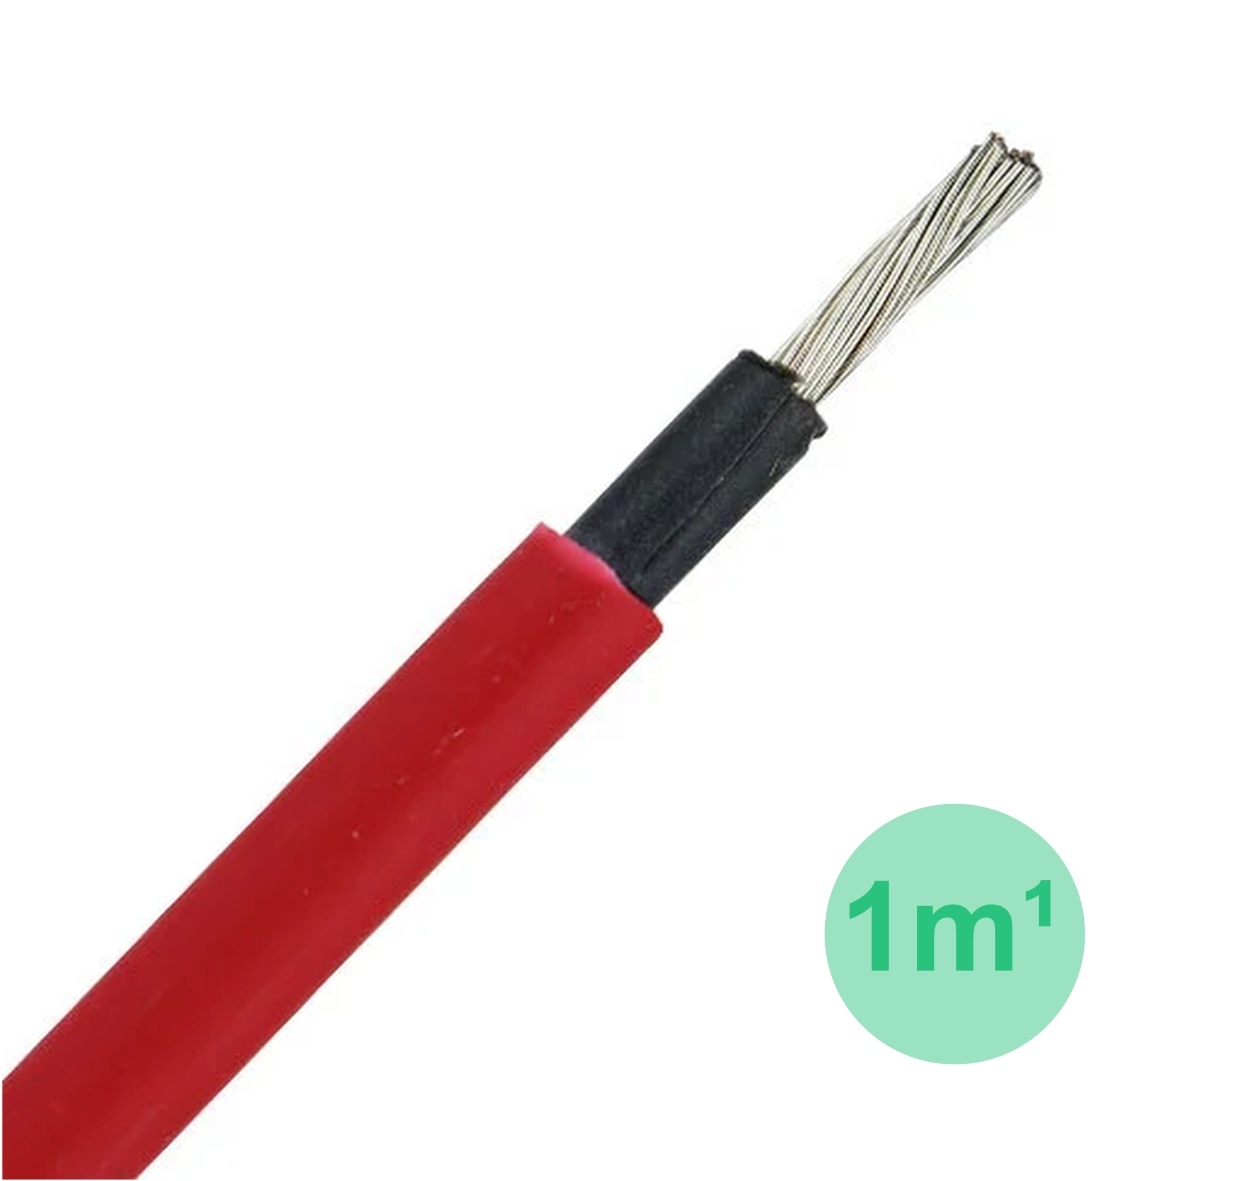 Want to buy Solar cable 6mm red? Order 1 piece per metre